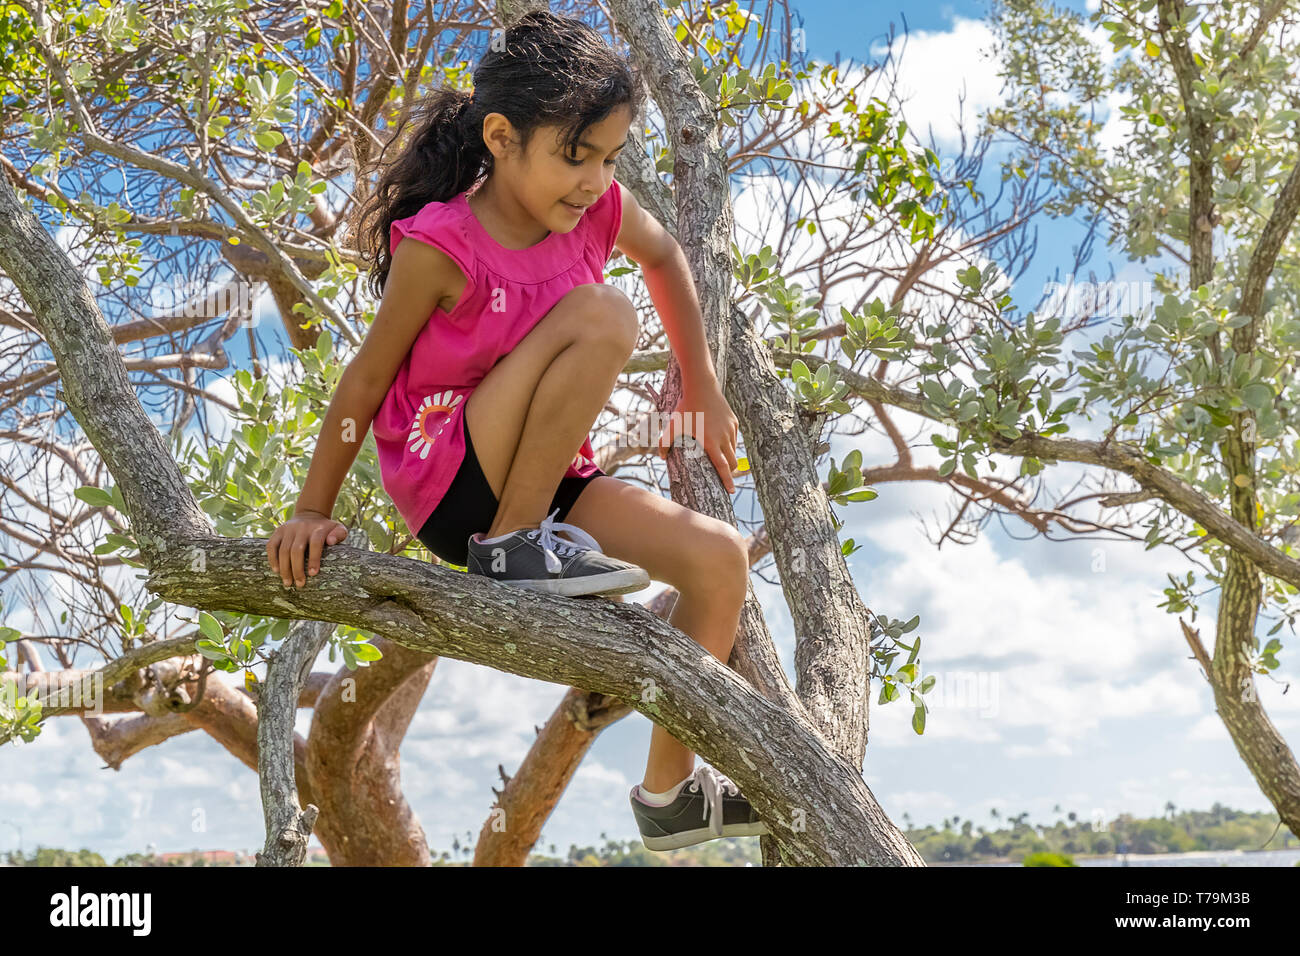 A young schoolgirl enjoys being high up in the trees. On a beautiful sunny day at the park with small trees, an adventurous girl makes her way up. Stock Photo